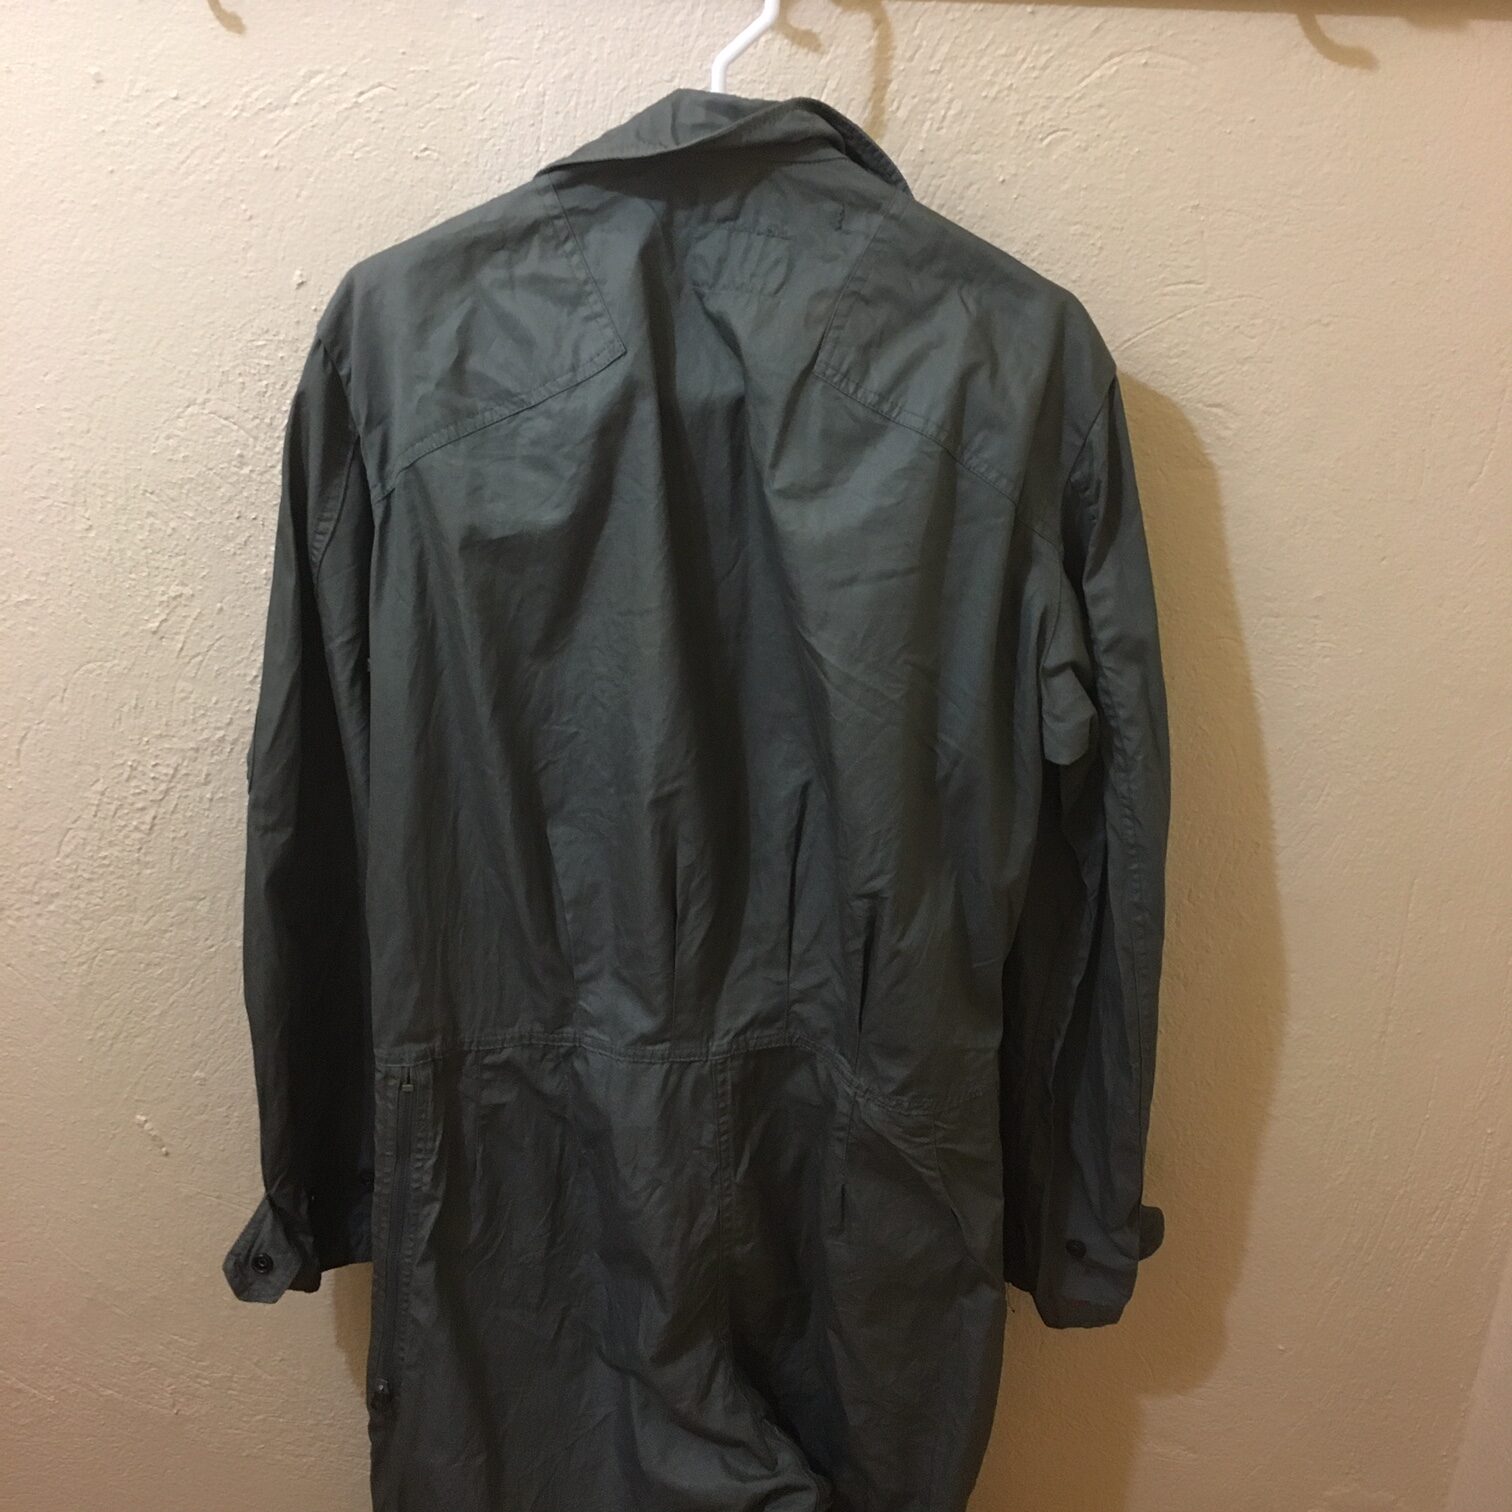 1950’s era U.S. Air Force Flight Suit – The War Store and More